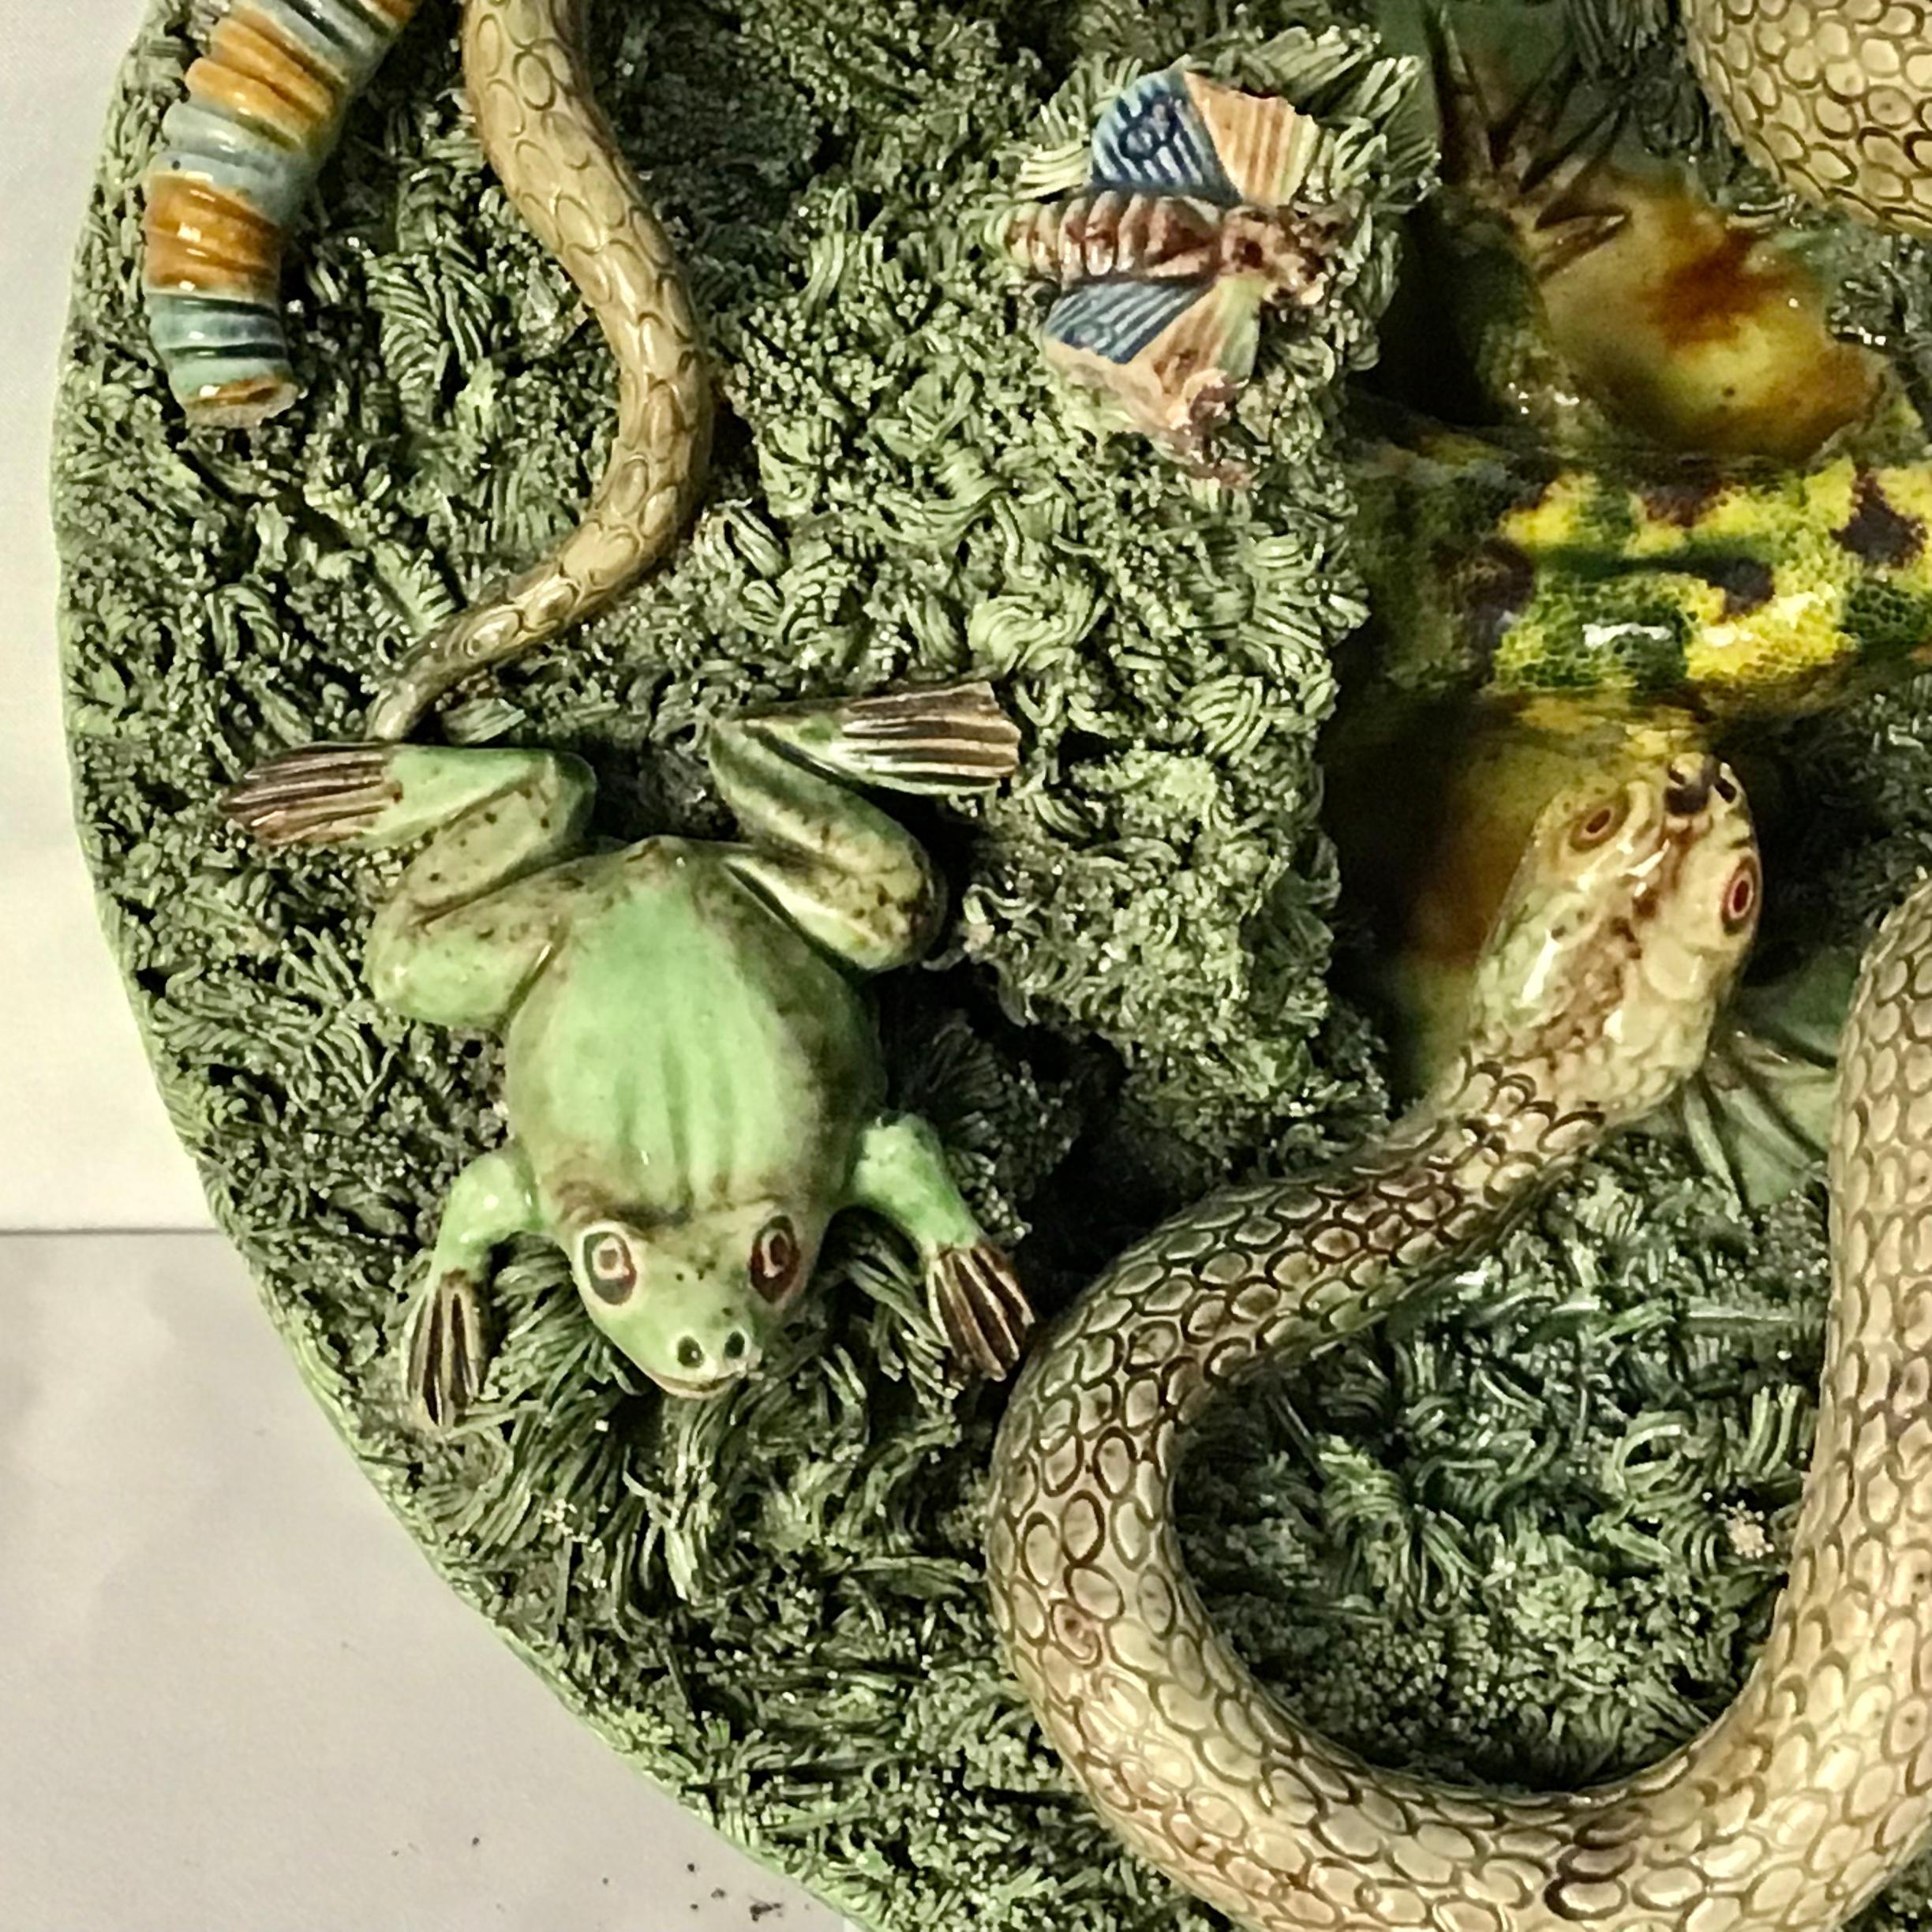 Portuguese palissy plate or charger with green grasses, coiled snake, grubs, lizard and butterfly. Signed: Jose A. Cunha, Caldas, Rainha, Portugal.